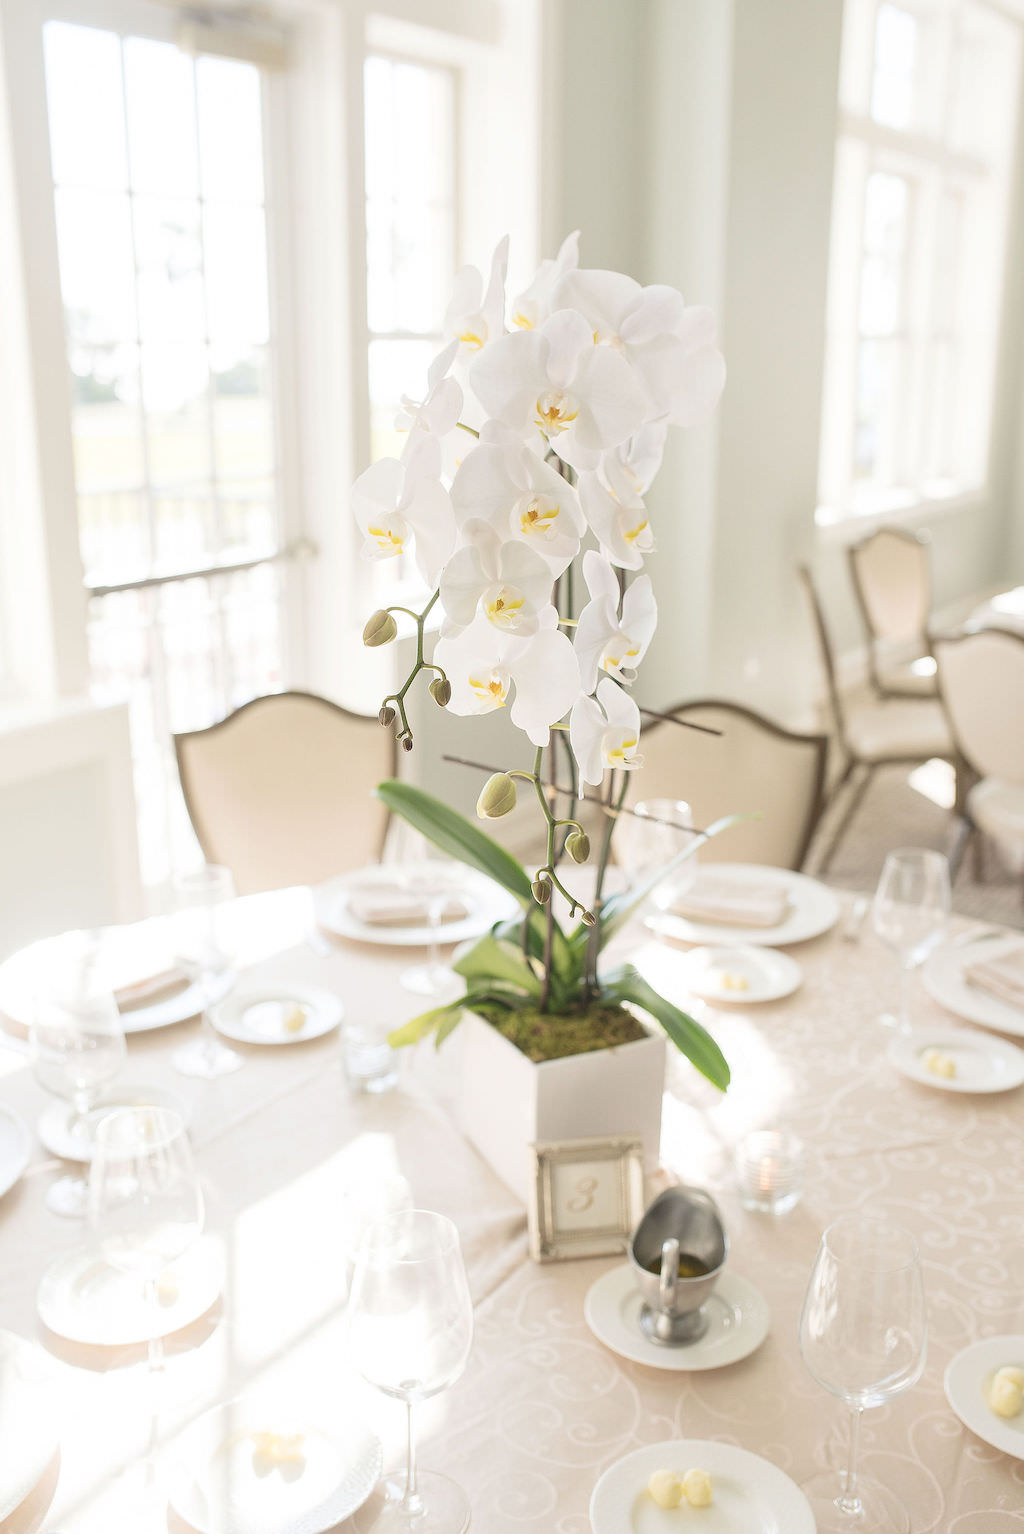 Simple, Classic Wedding Reception Decor, Tall White Orchid Floral Centerpiece | Tampa Bay Wedding Photographer Kristen Marie Photography | Tampa Bay Wedding Planner Special Moments Event Planner